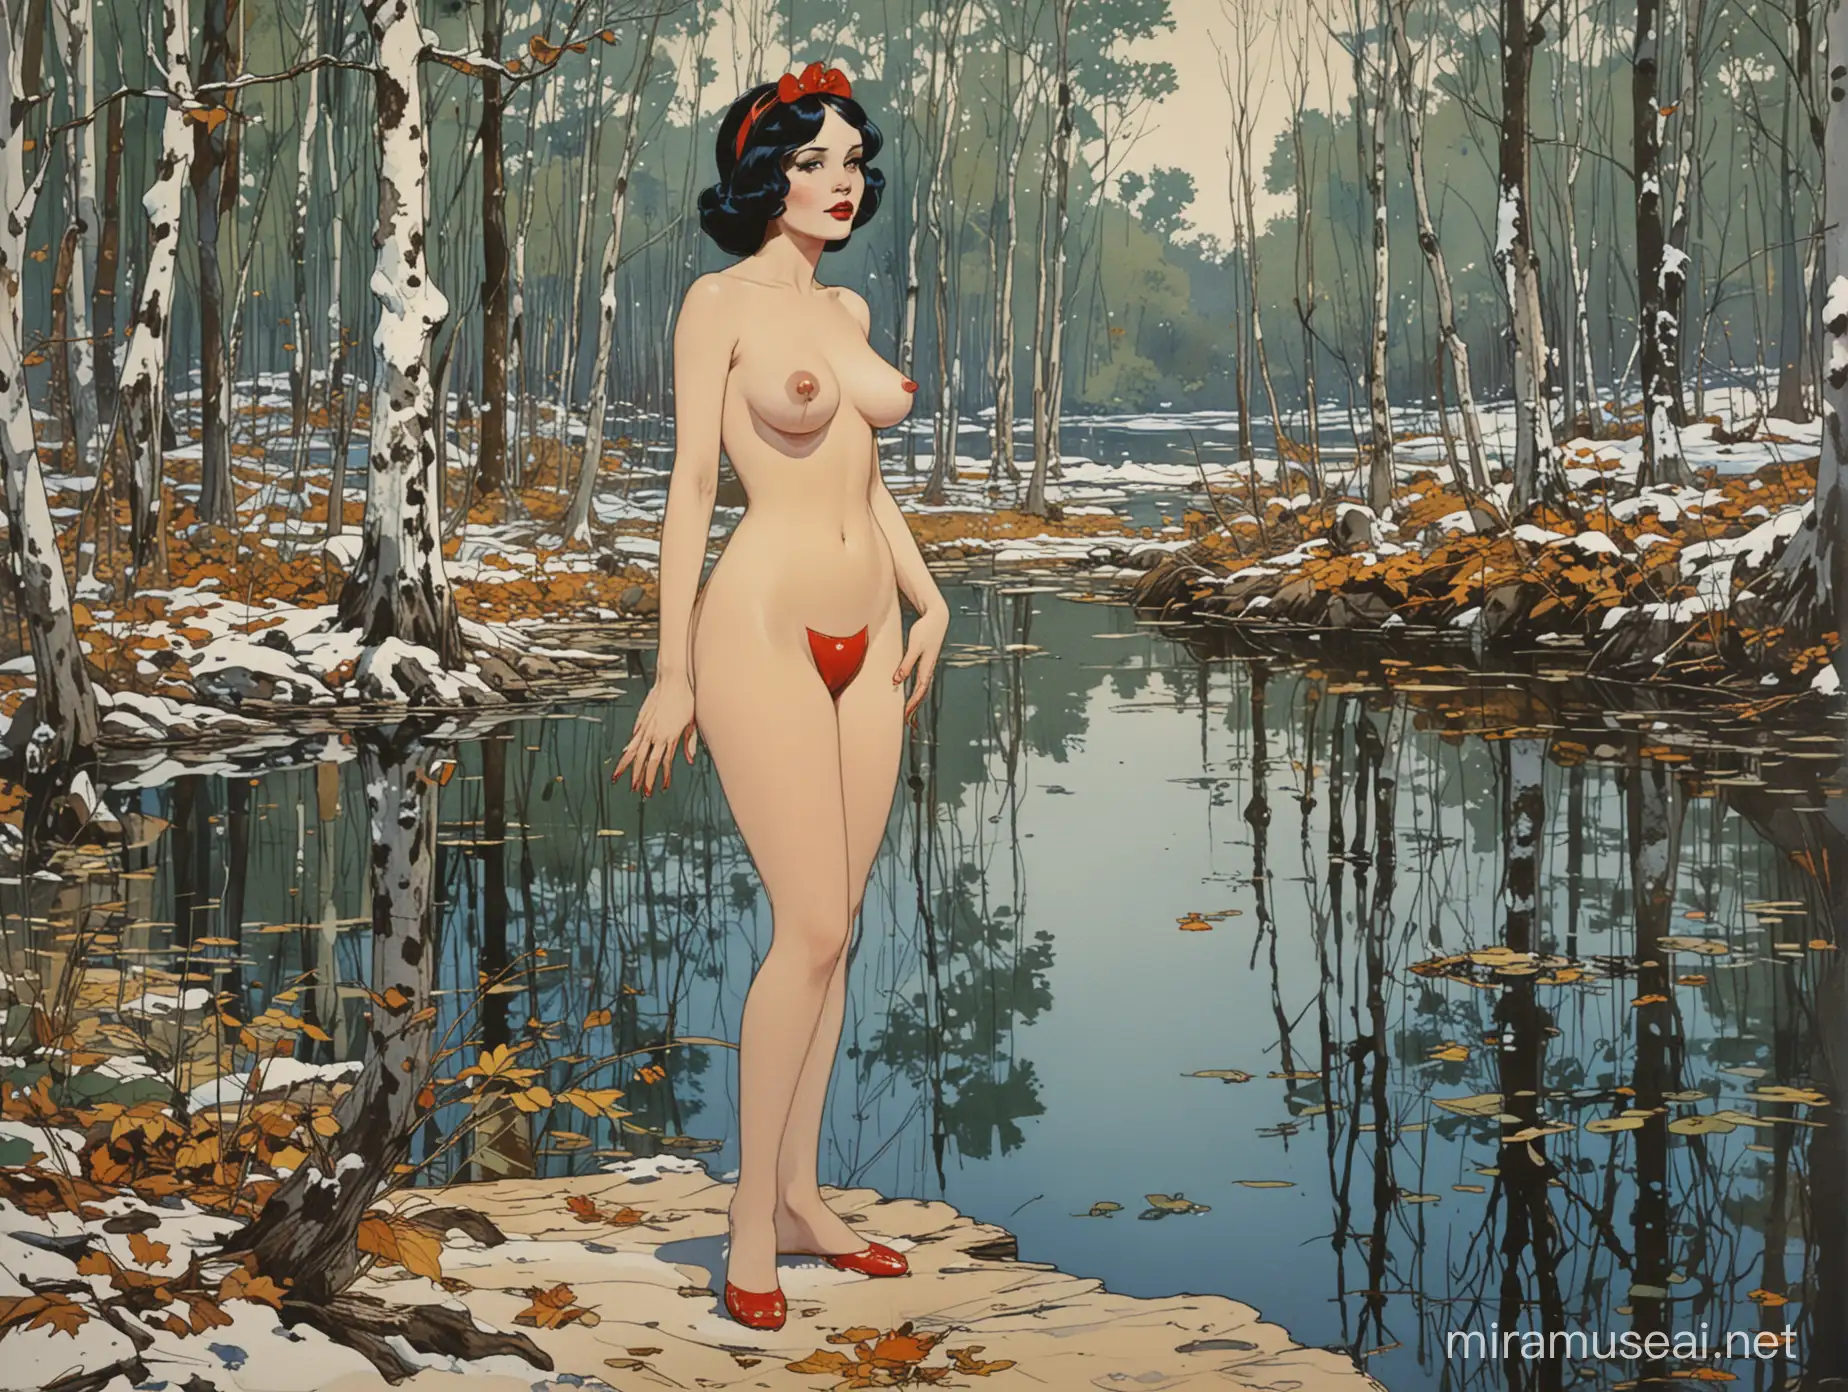 Biancaneve in the woods by a lake, Leone Frollo